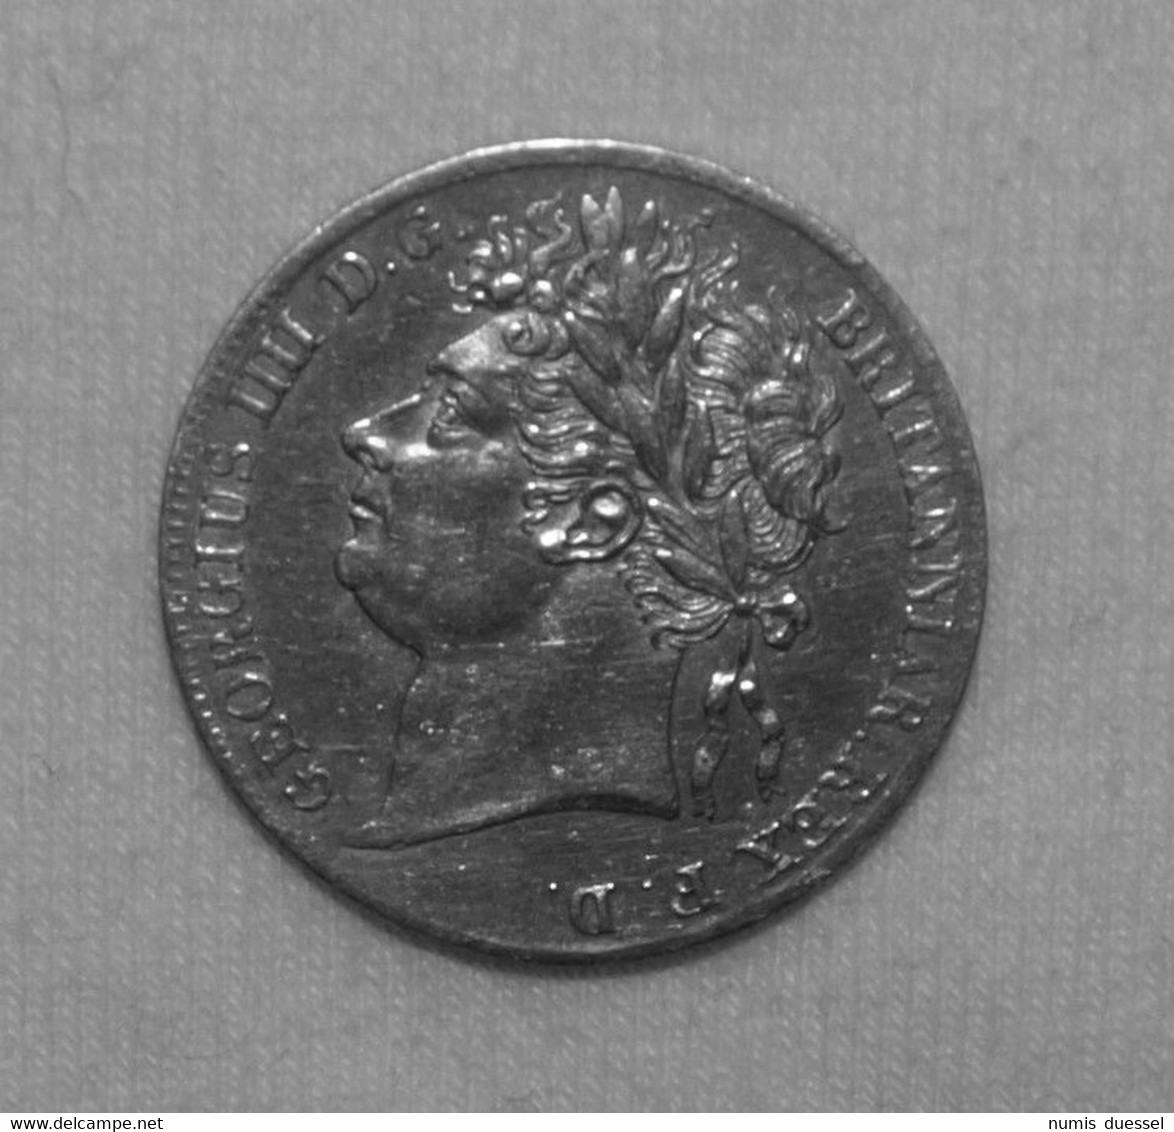 Silber/Silver Prooflike Maundy Großbritannien/Great Britain George IV, 1825, 4 Pence UNC - Maundy Sets & Commemorative